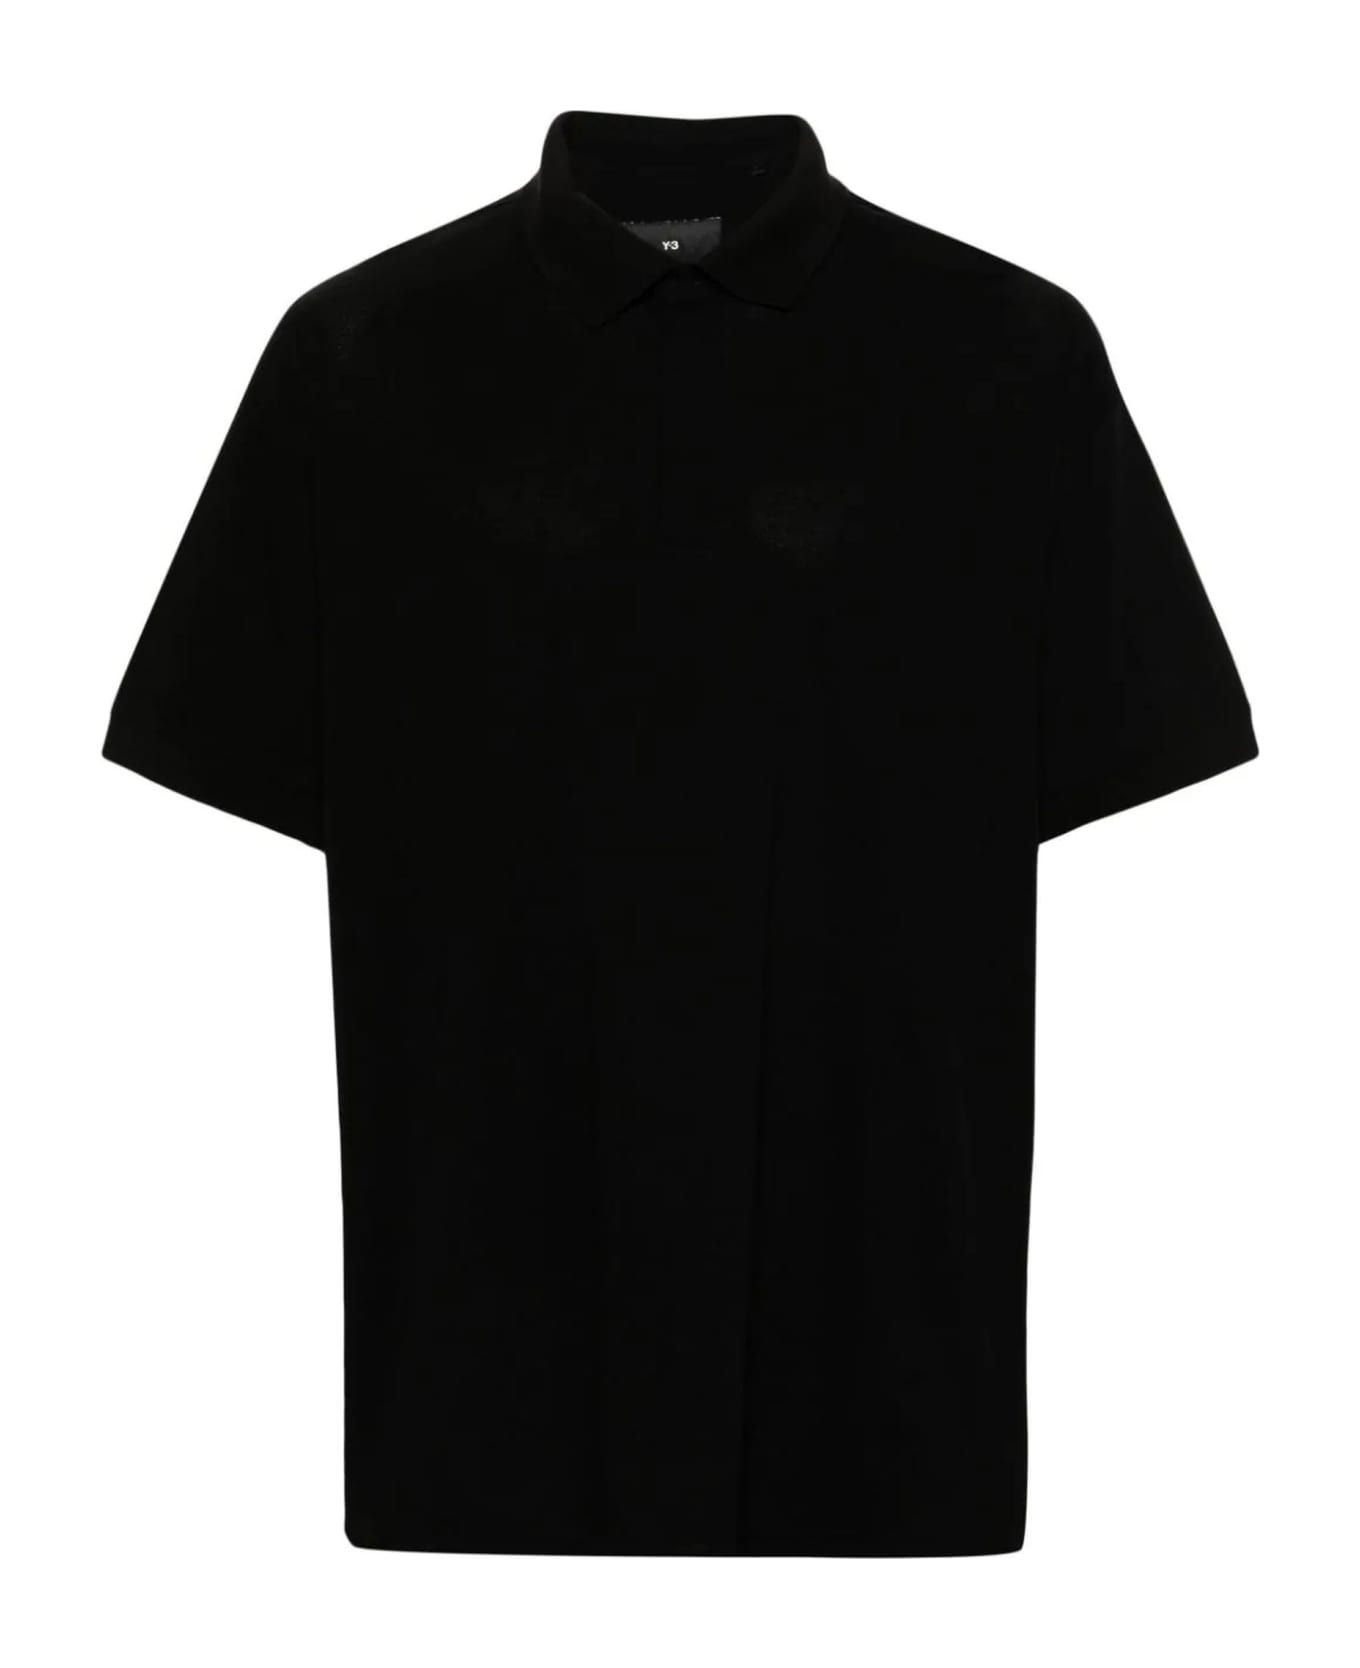 Y-3 T-shirts And Polos Black - Black ポロシャツ